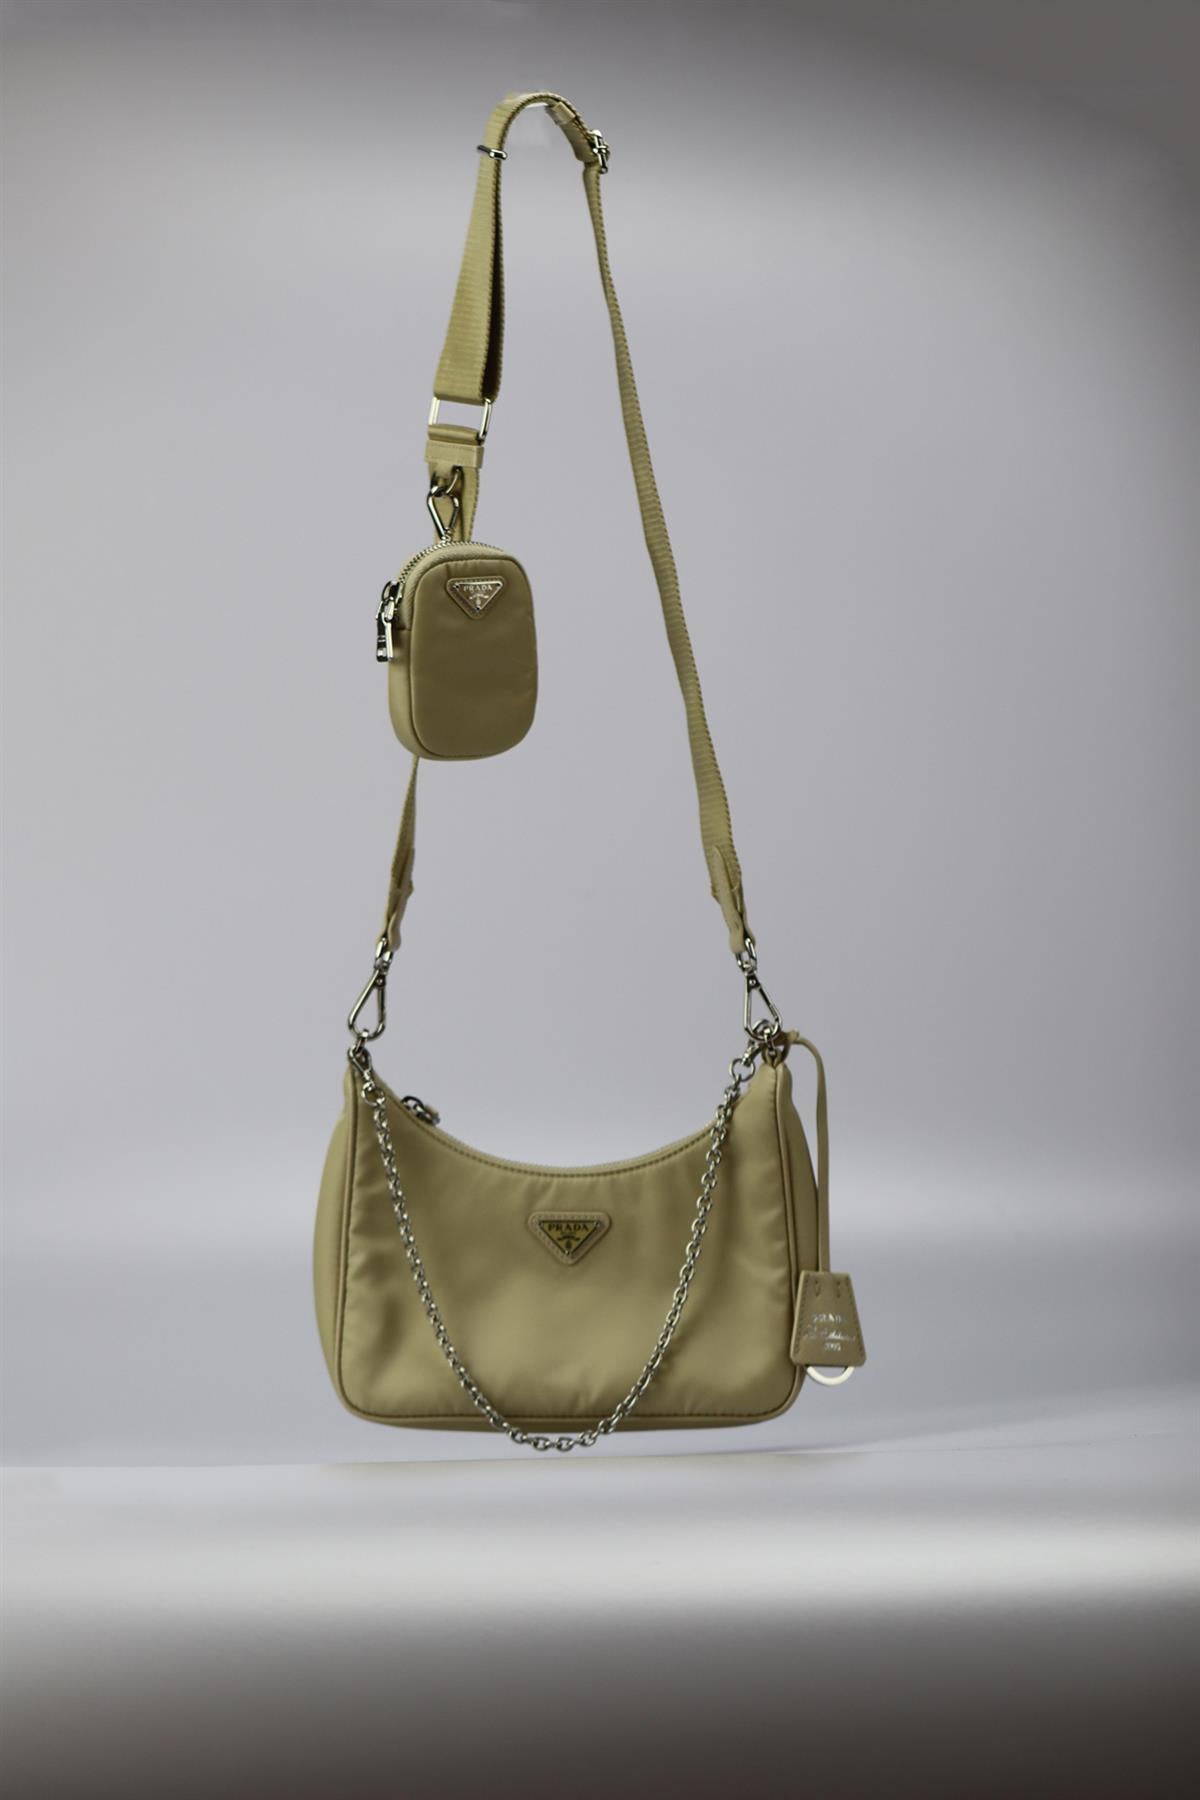 Prada Re-edition 2005 Textured Leather And Nylon Shoulder Bag. Beige. Zip fastening - Top. Does not come with - dustbag or box. Height: 6.4 In. Width: 8.5 In. Depth: 2.2 In. Handle drop: 10.5 in. Strap drop: 19.7 In. Condition: Used. Very good